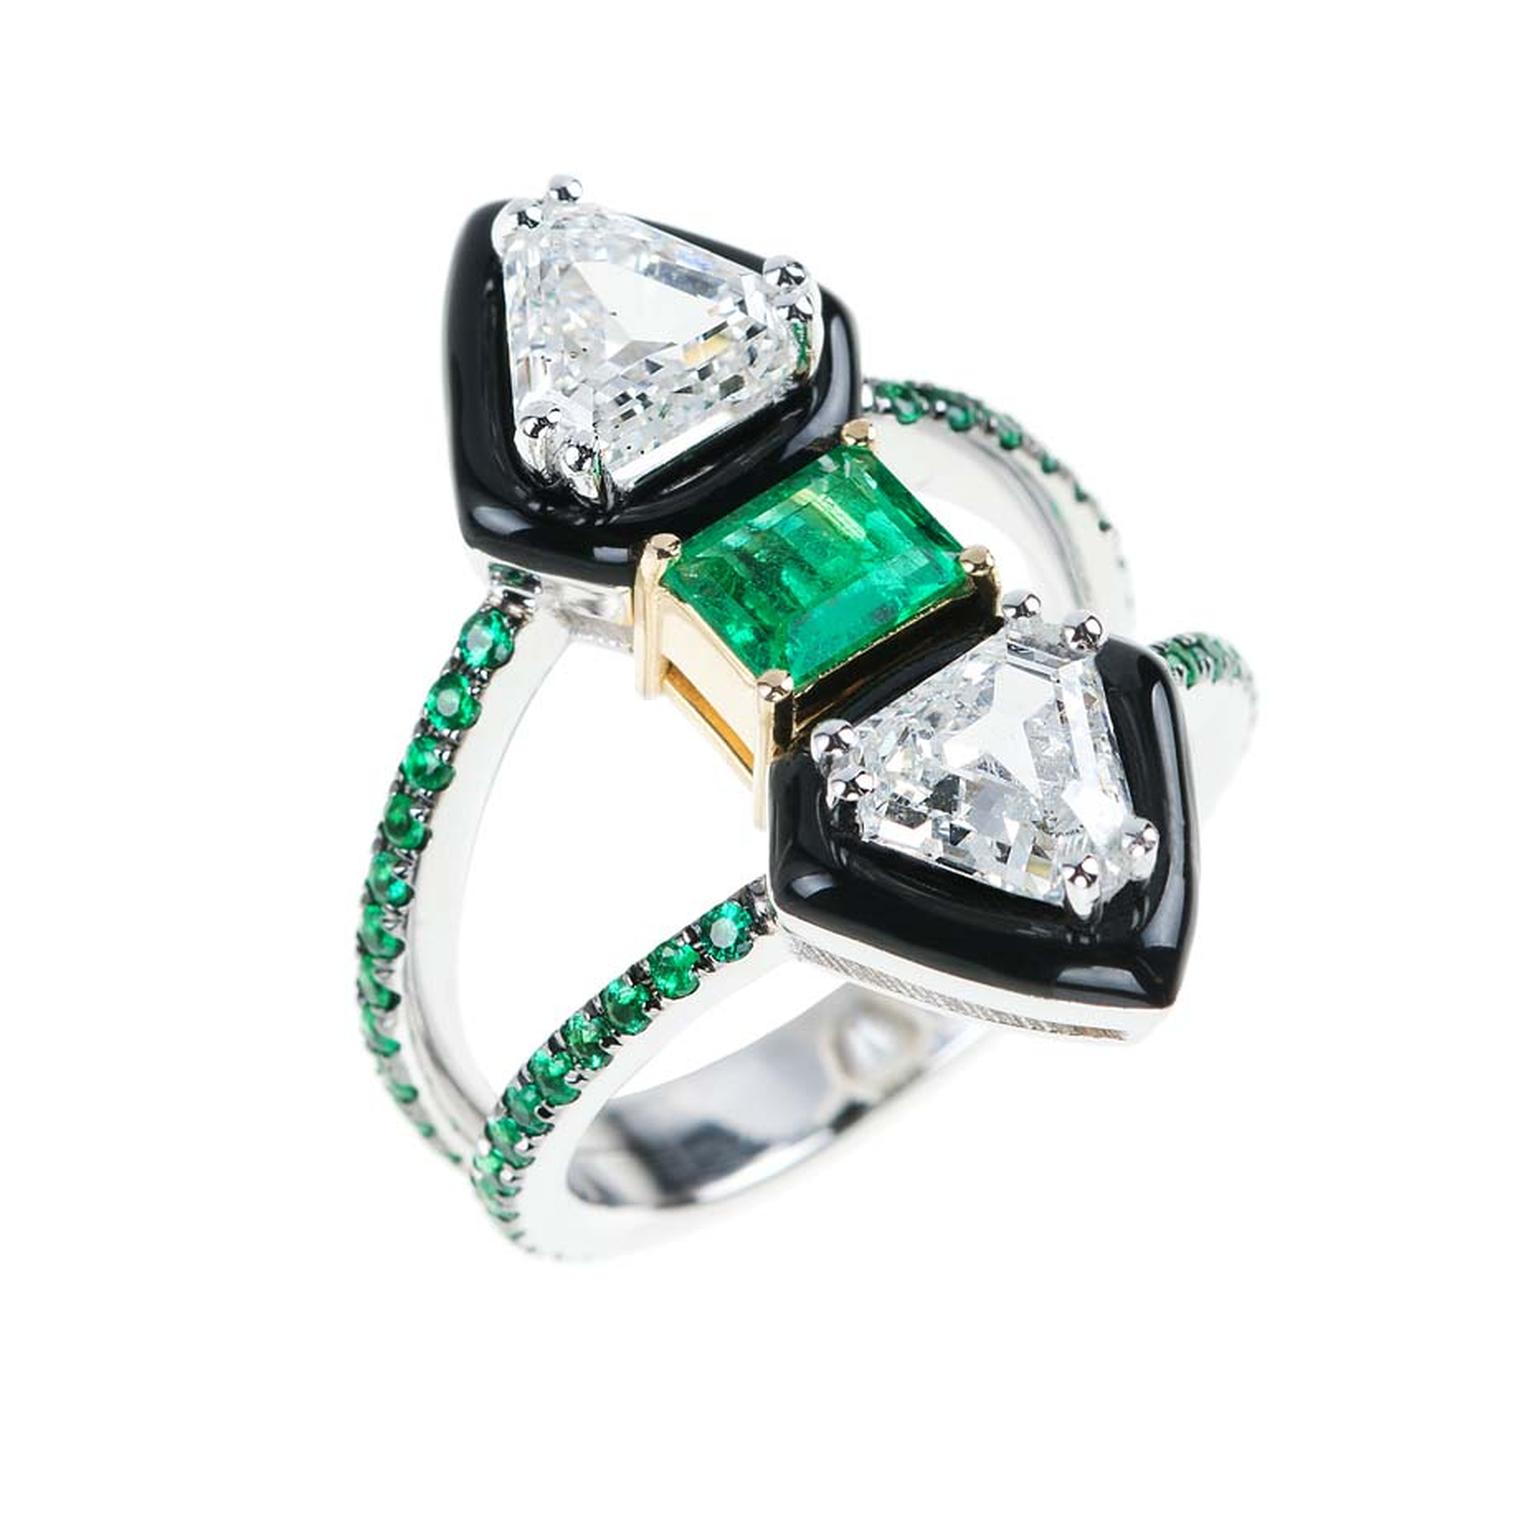 Nikos Koulis creates a powerful silhouette for his new "Oui" collection of unique engagement rings using black enamel. This diamond engagement ring is set with a central emerald and additional pavé emeralds around the double band.